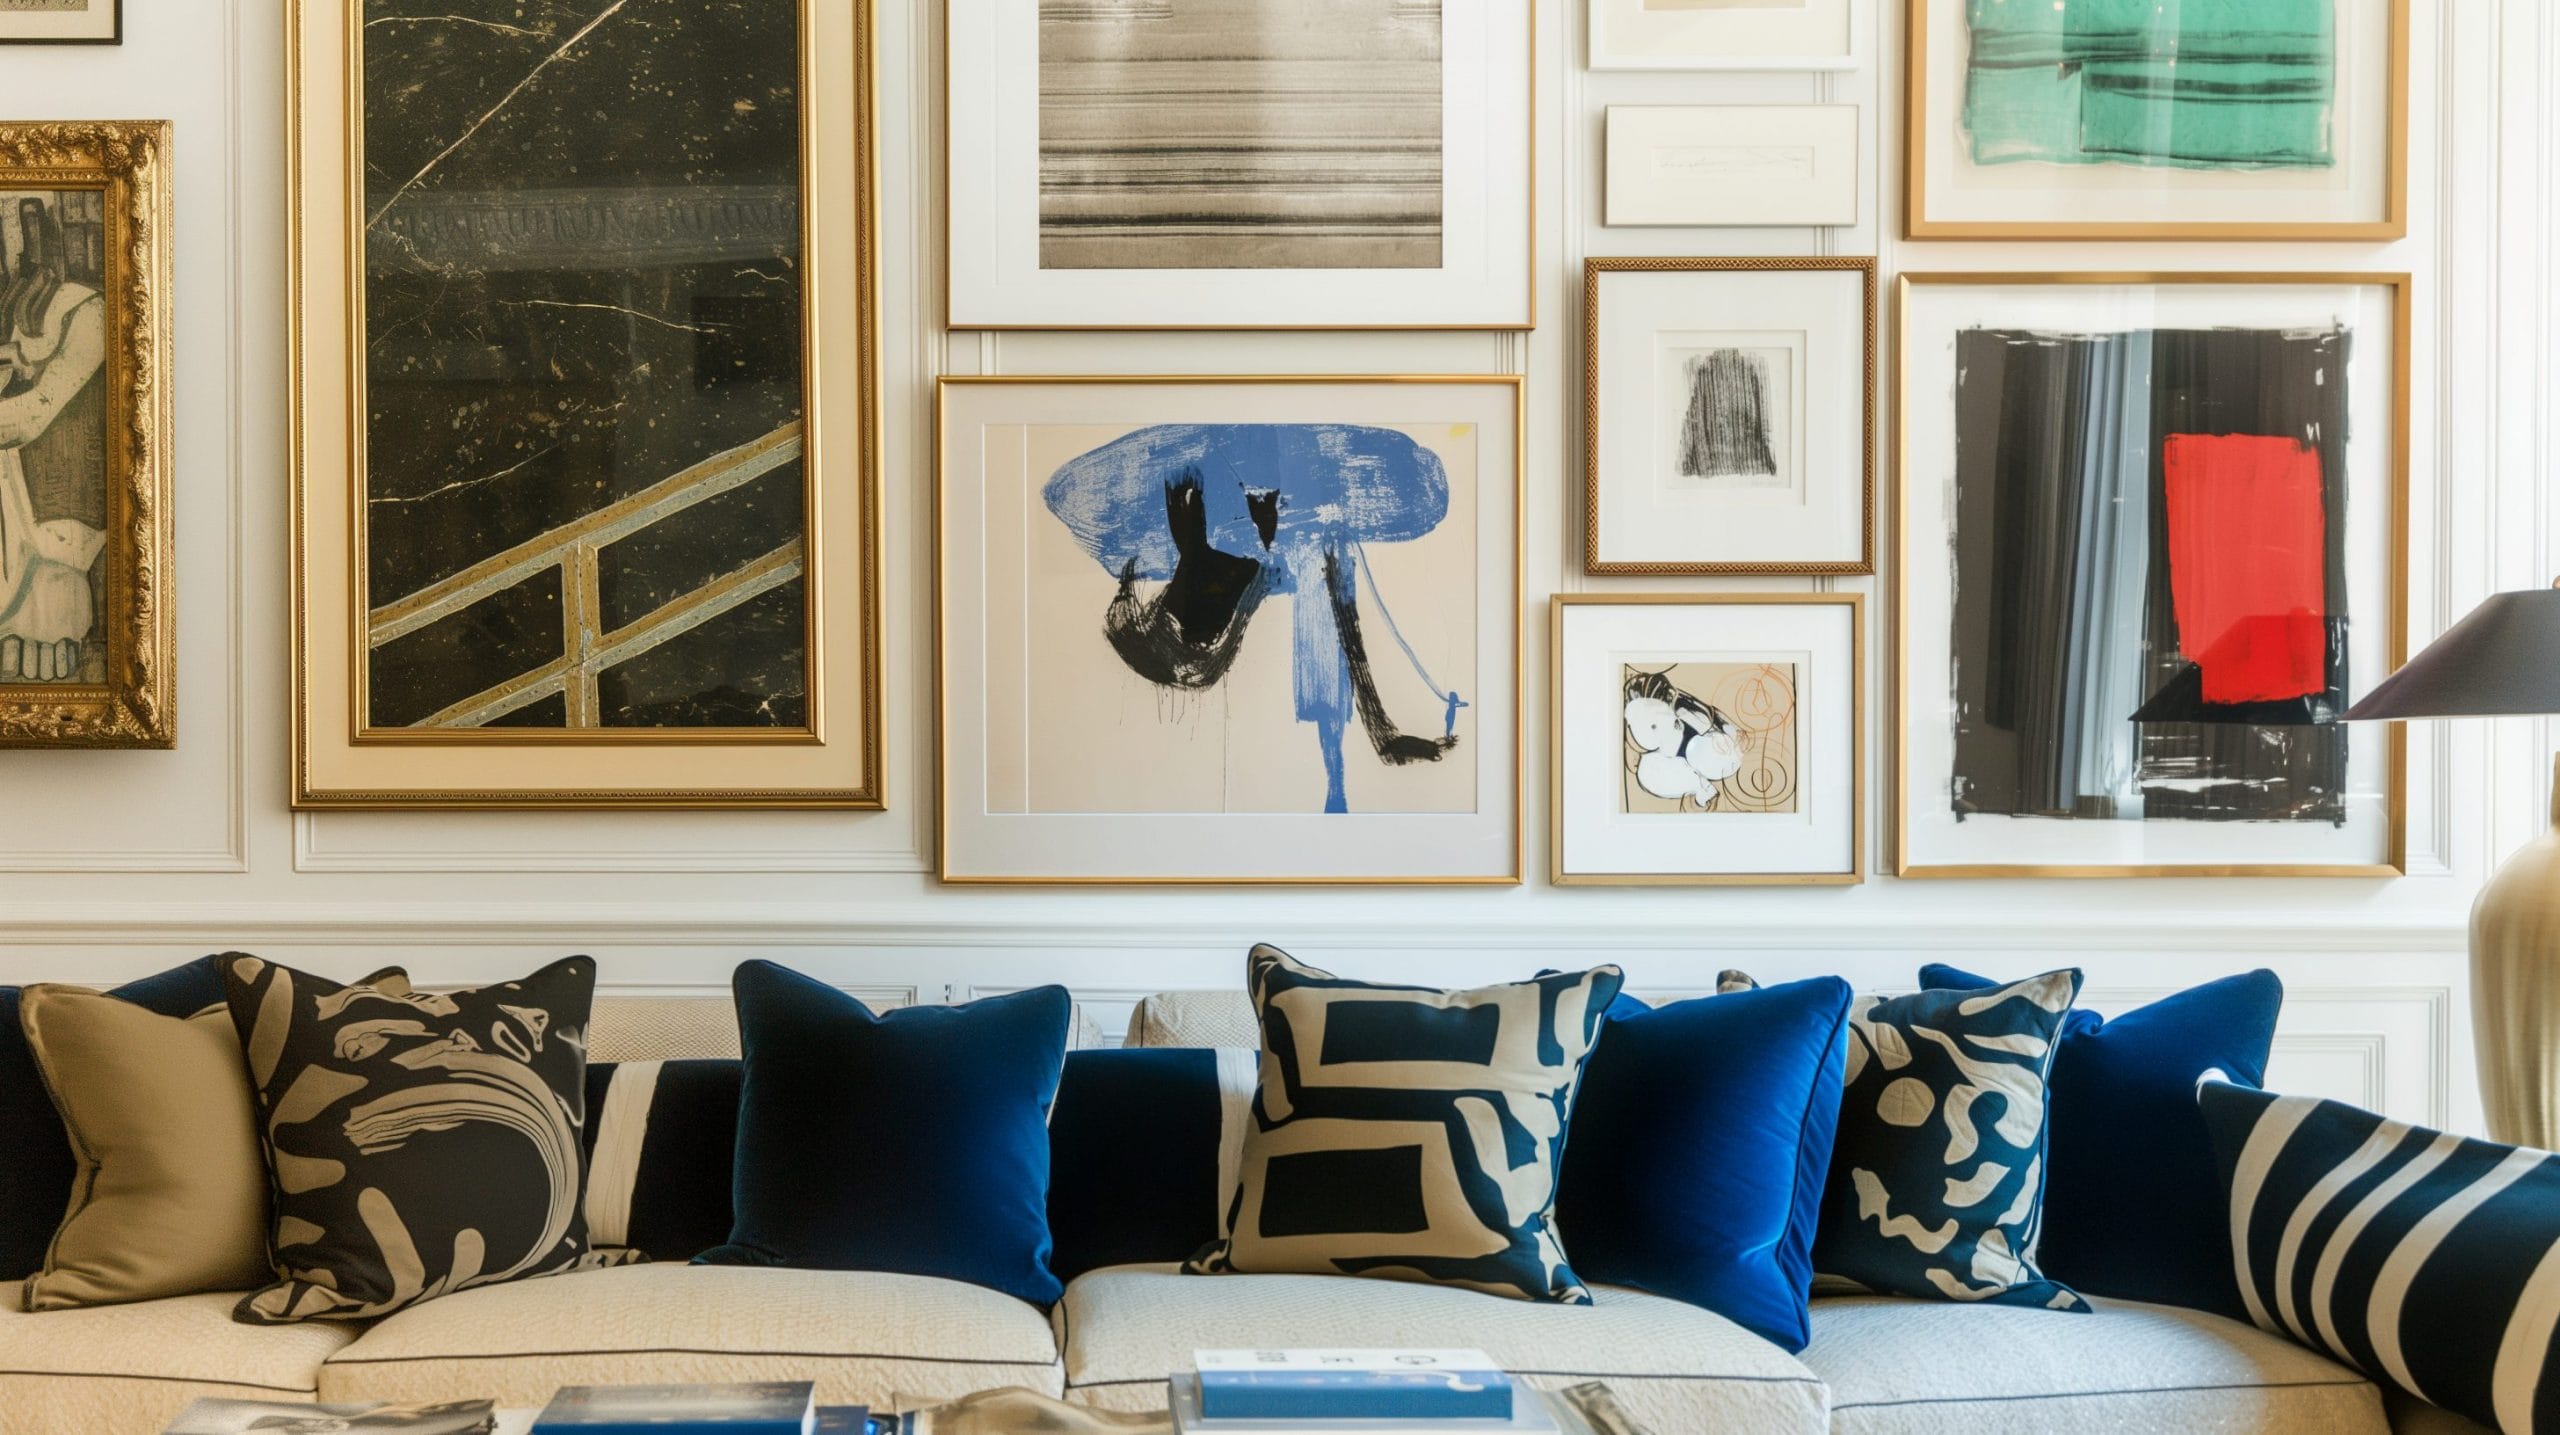 How to choose art for your home by Decorilla